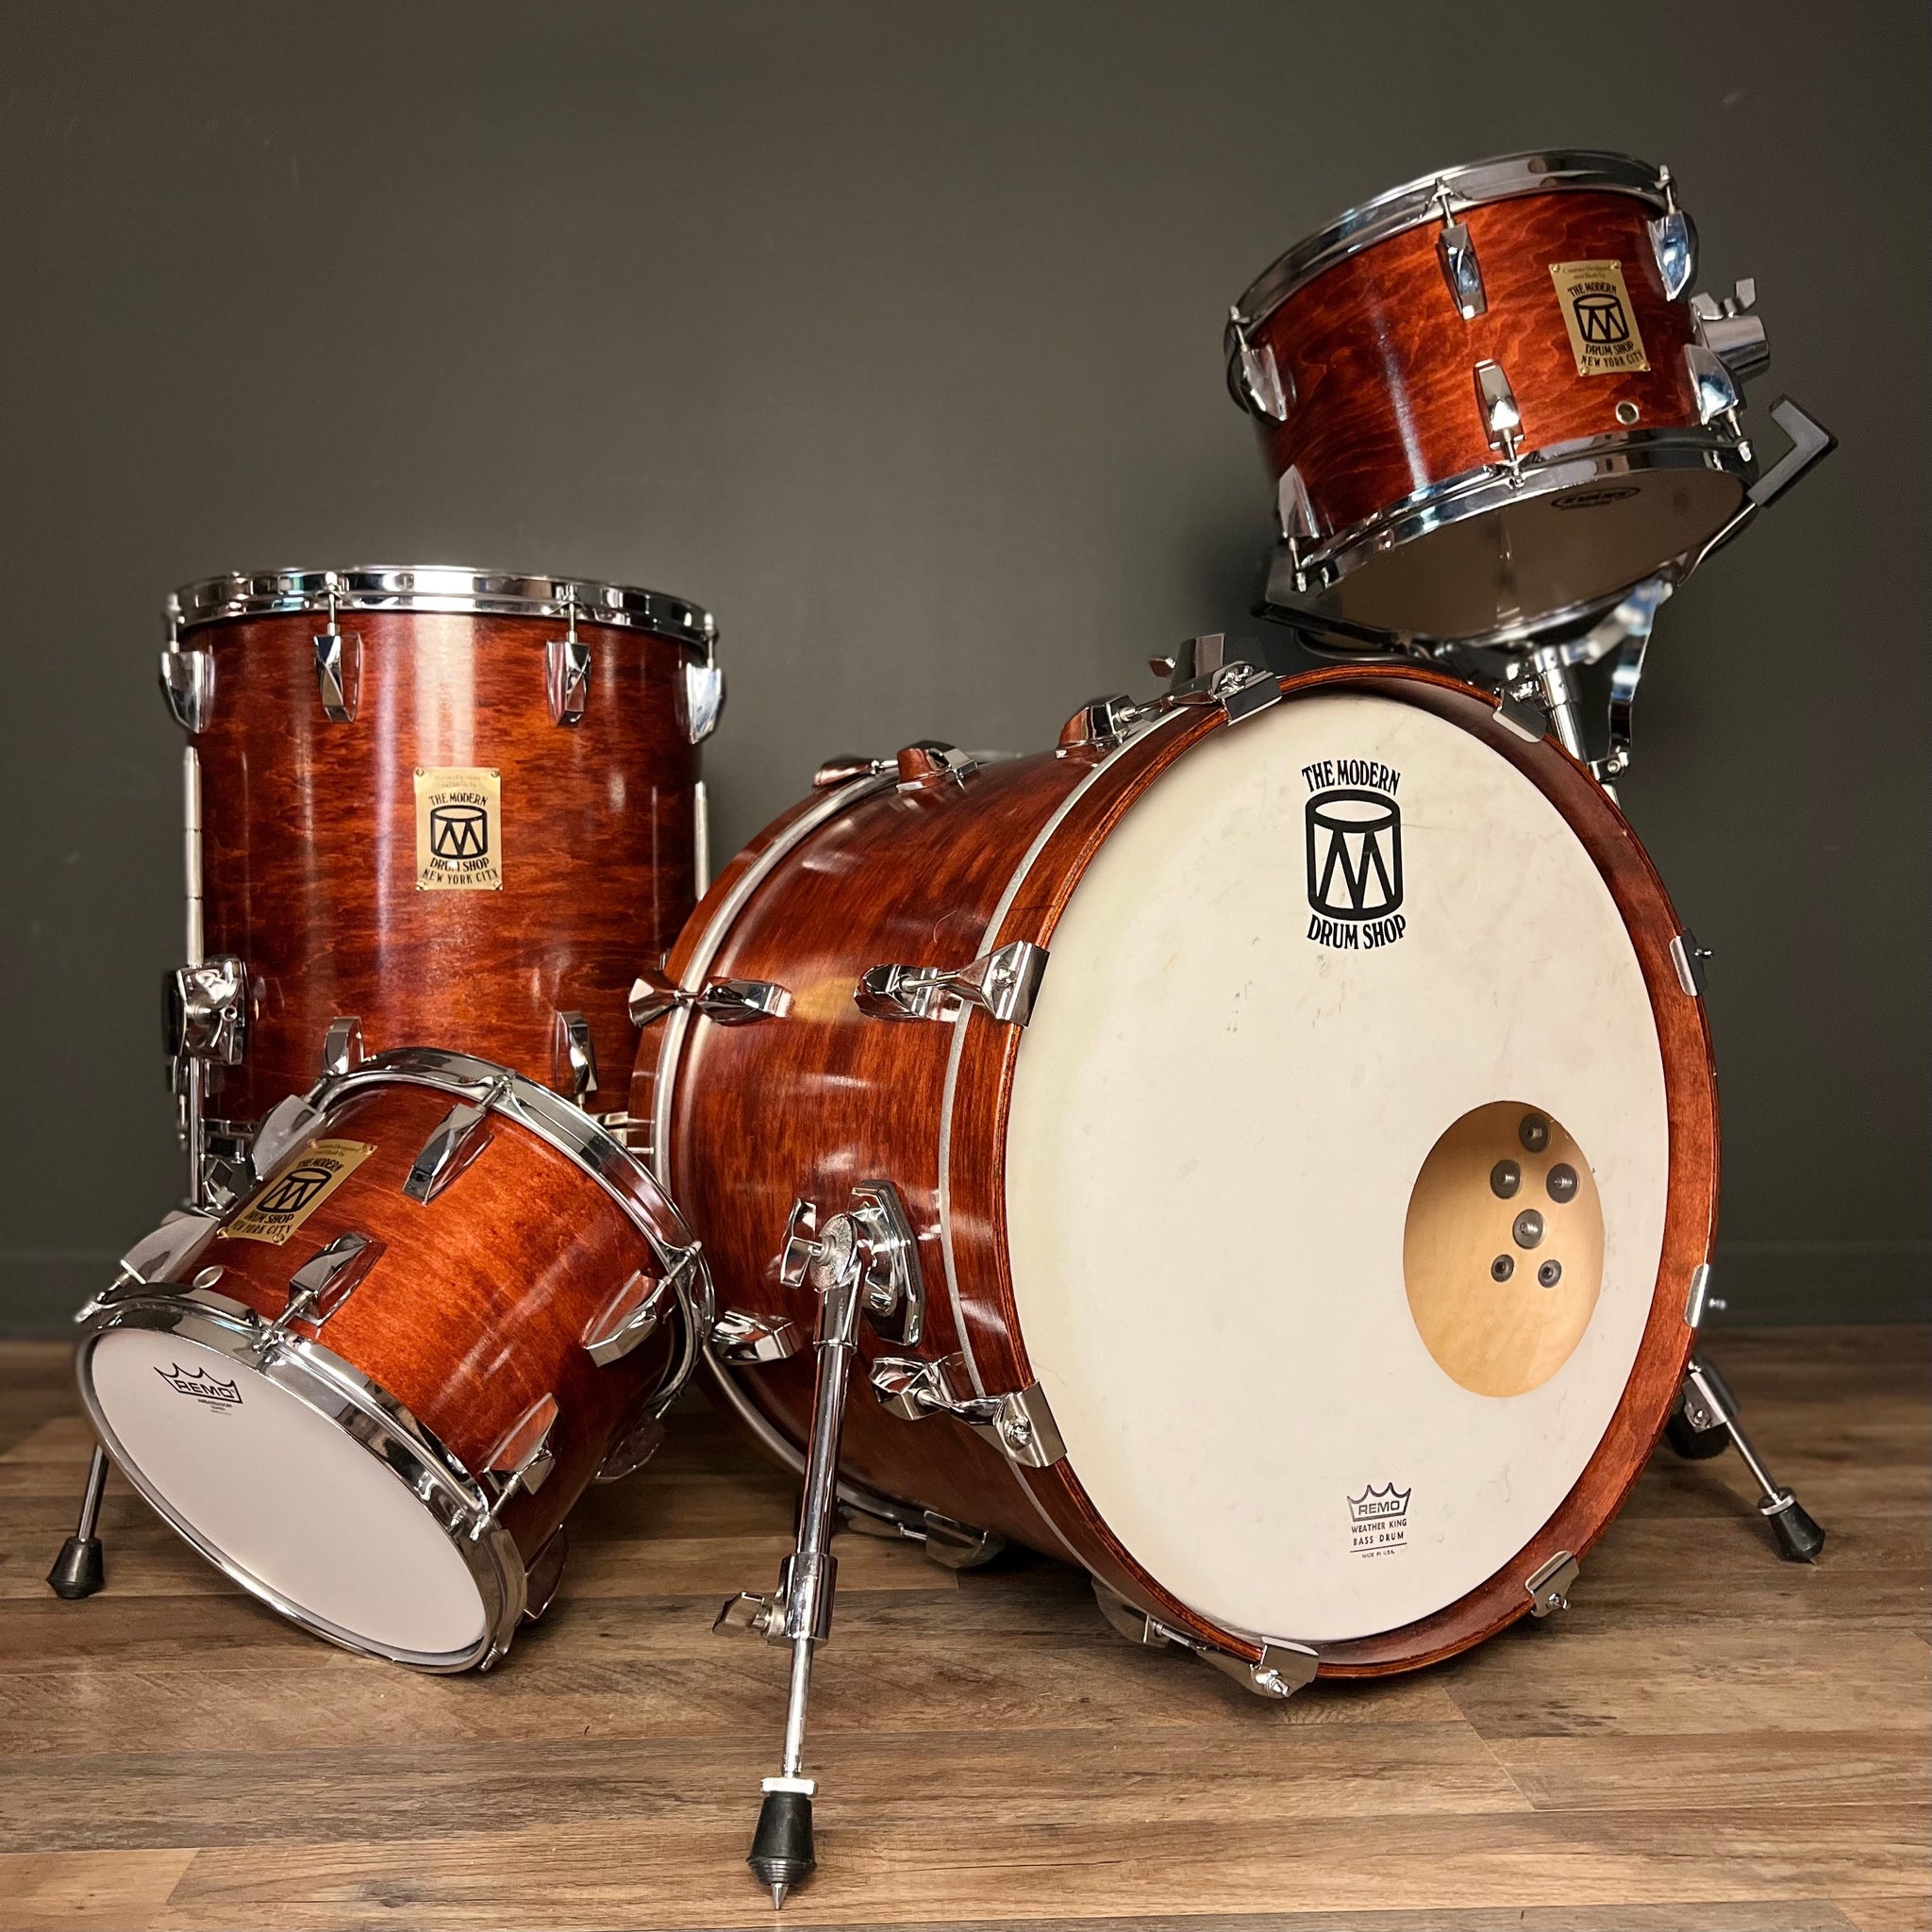 USED Modern Drum Shop Drum Set in Mahogany Stain - 14x20, 8x10, 8x12, 14x14